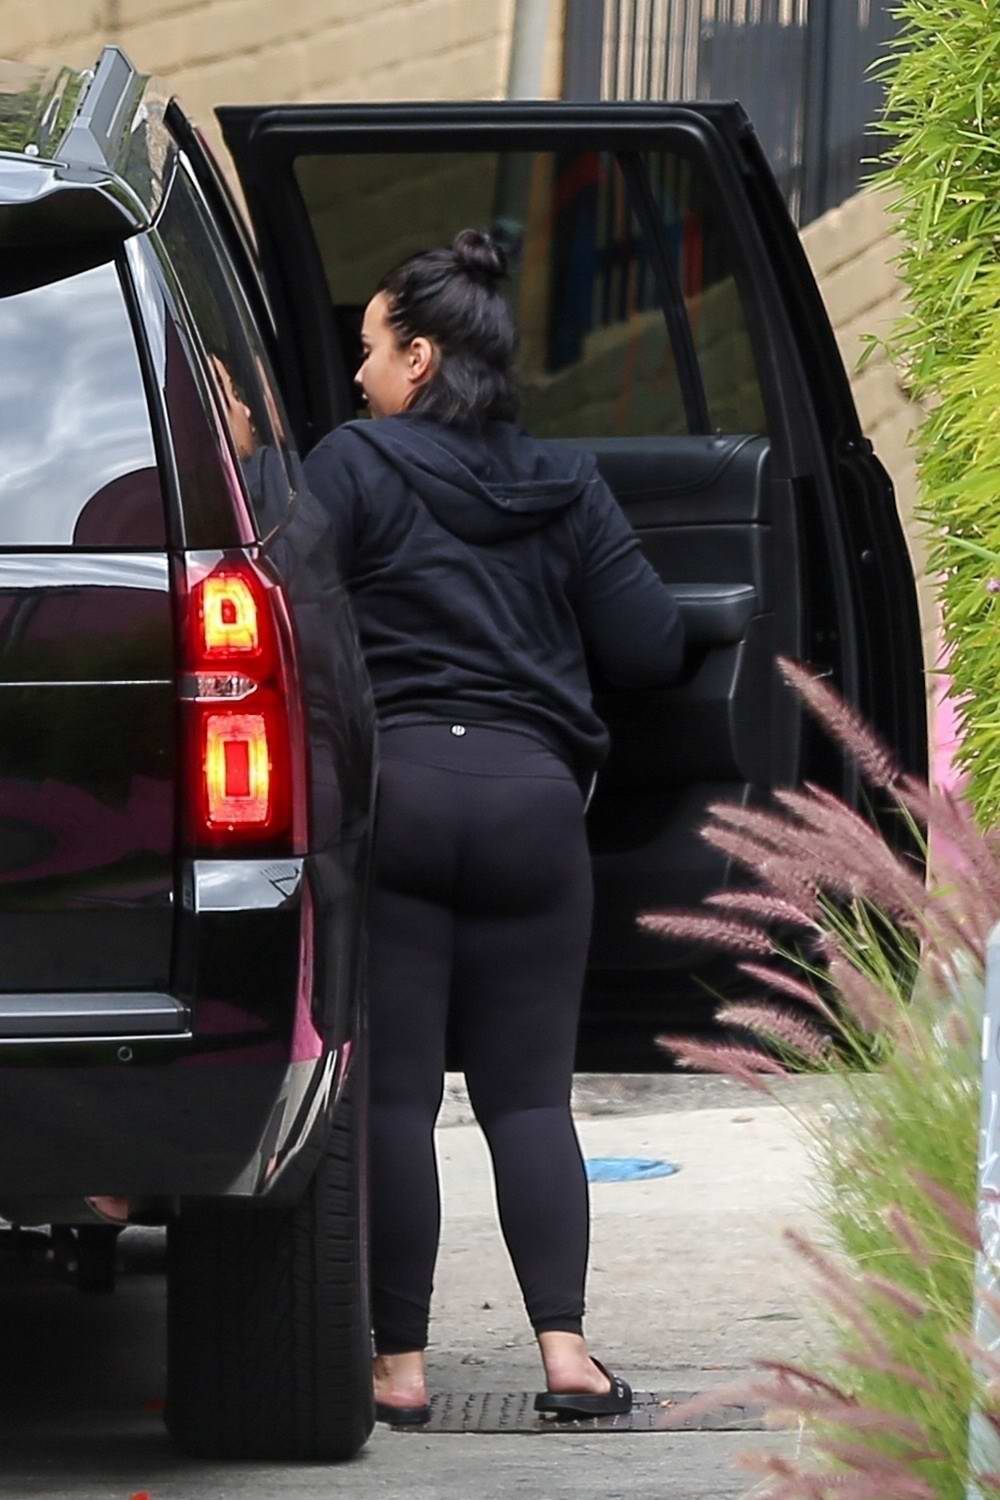 Calzedonia - SPOTTED  Demi Lovato in our sheer tights